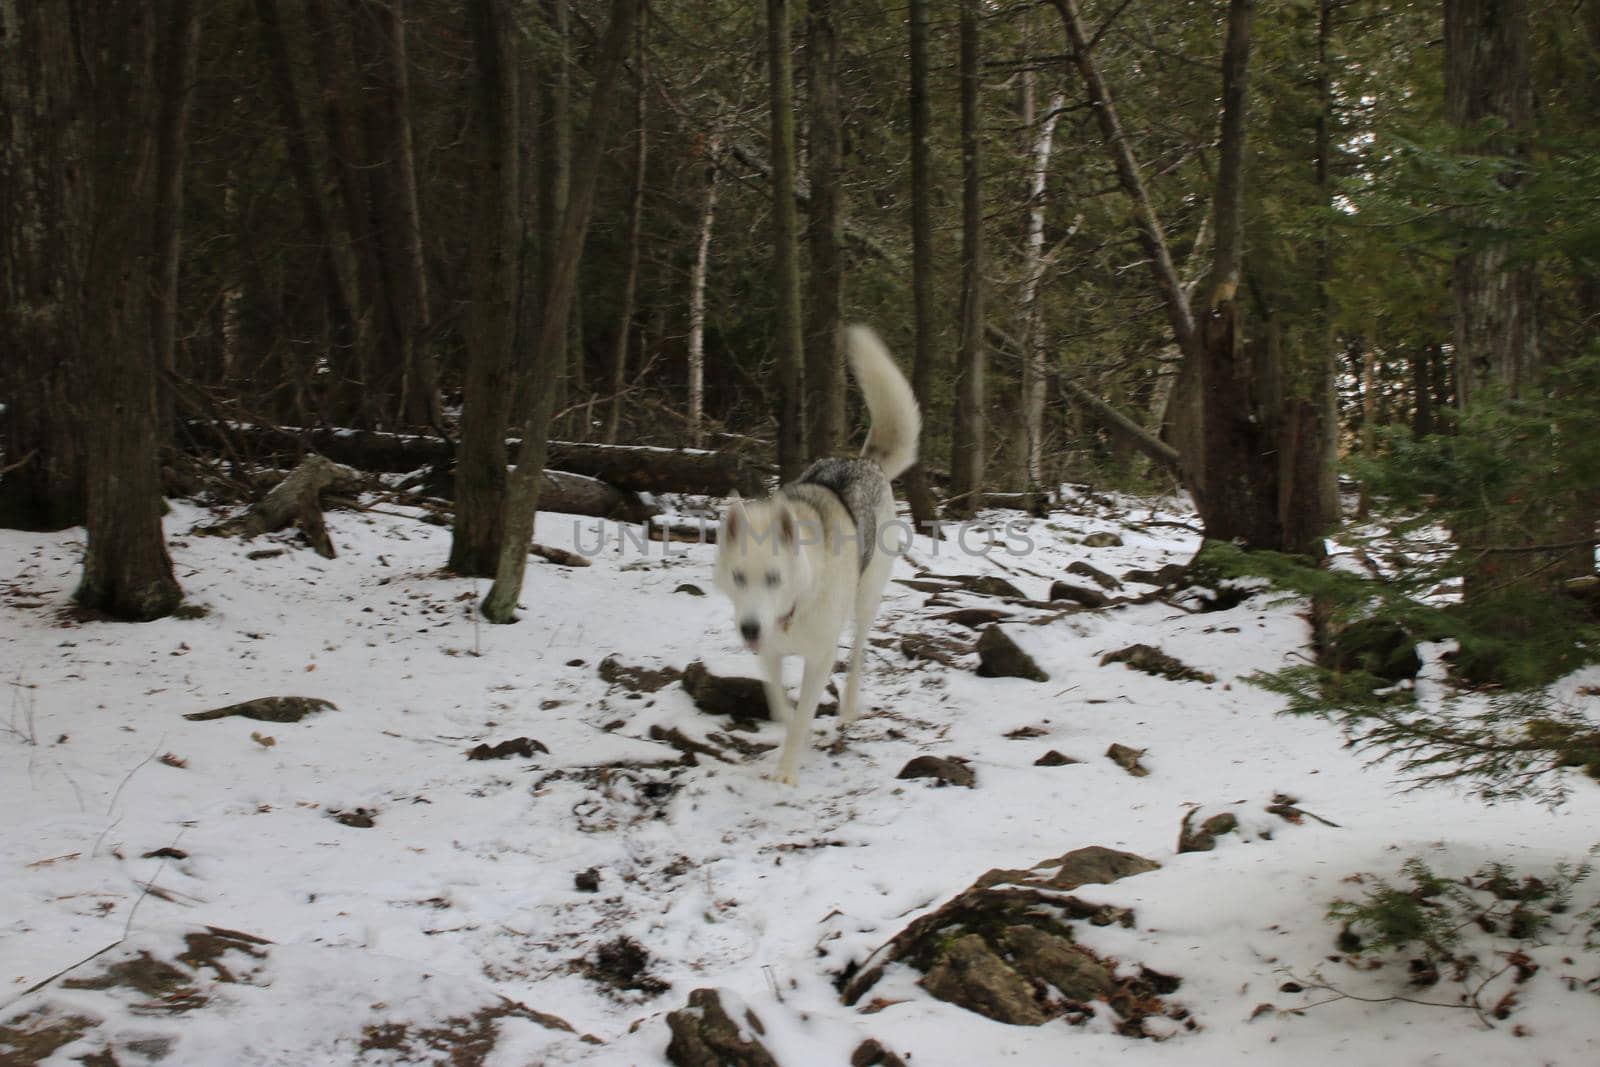 Husky hiking through a snowy winter forest. High quality photo